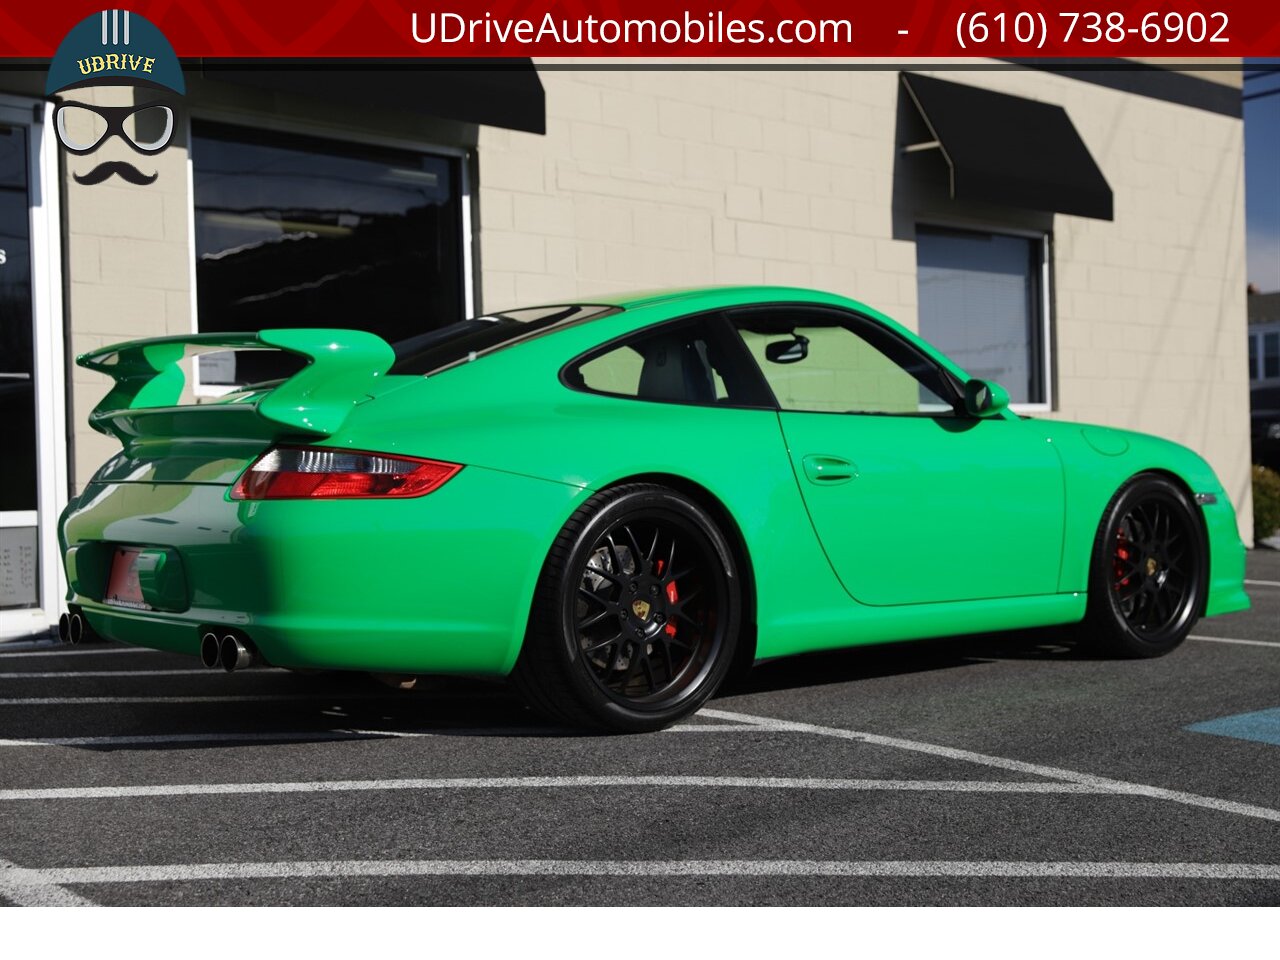 2008 Porsche 911 S 997 6Sp PTS RS Green AeroKit 1of a Kind  $118k MSRP Champion F77 Pkg RG5 Whls - Photo 20 - West Chester, PA 19382